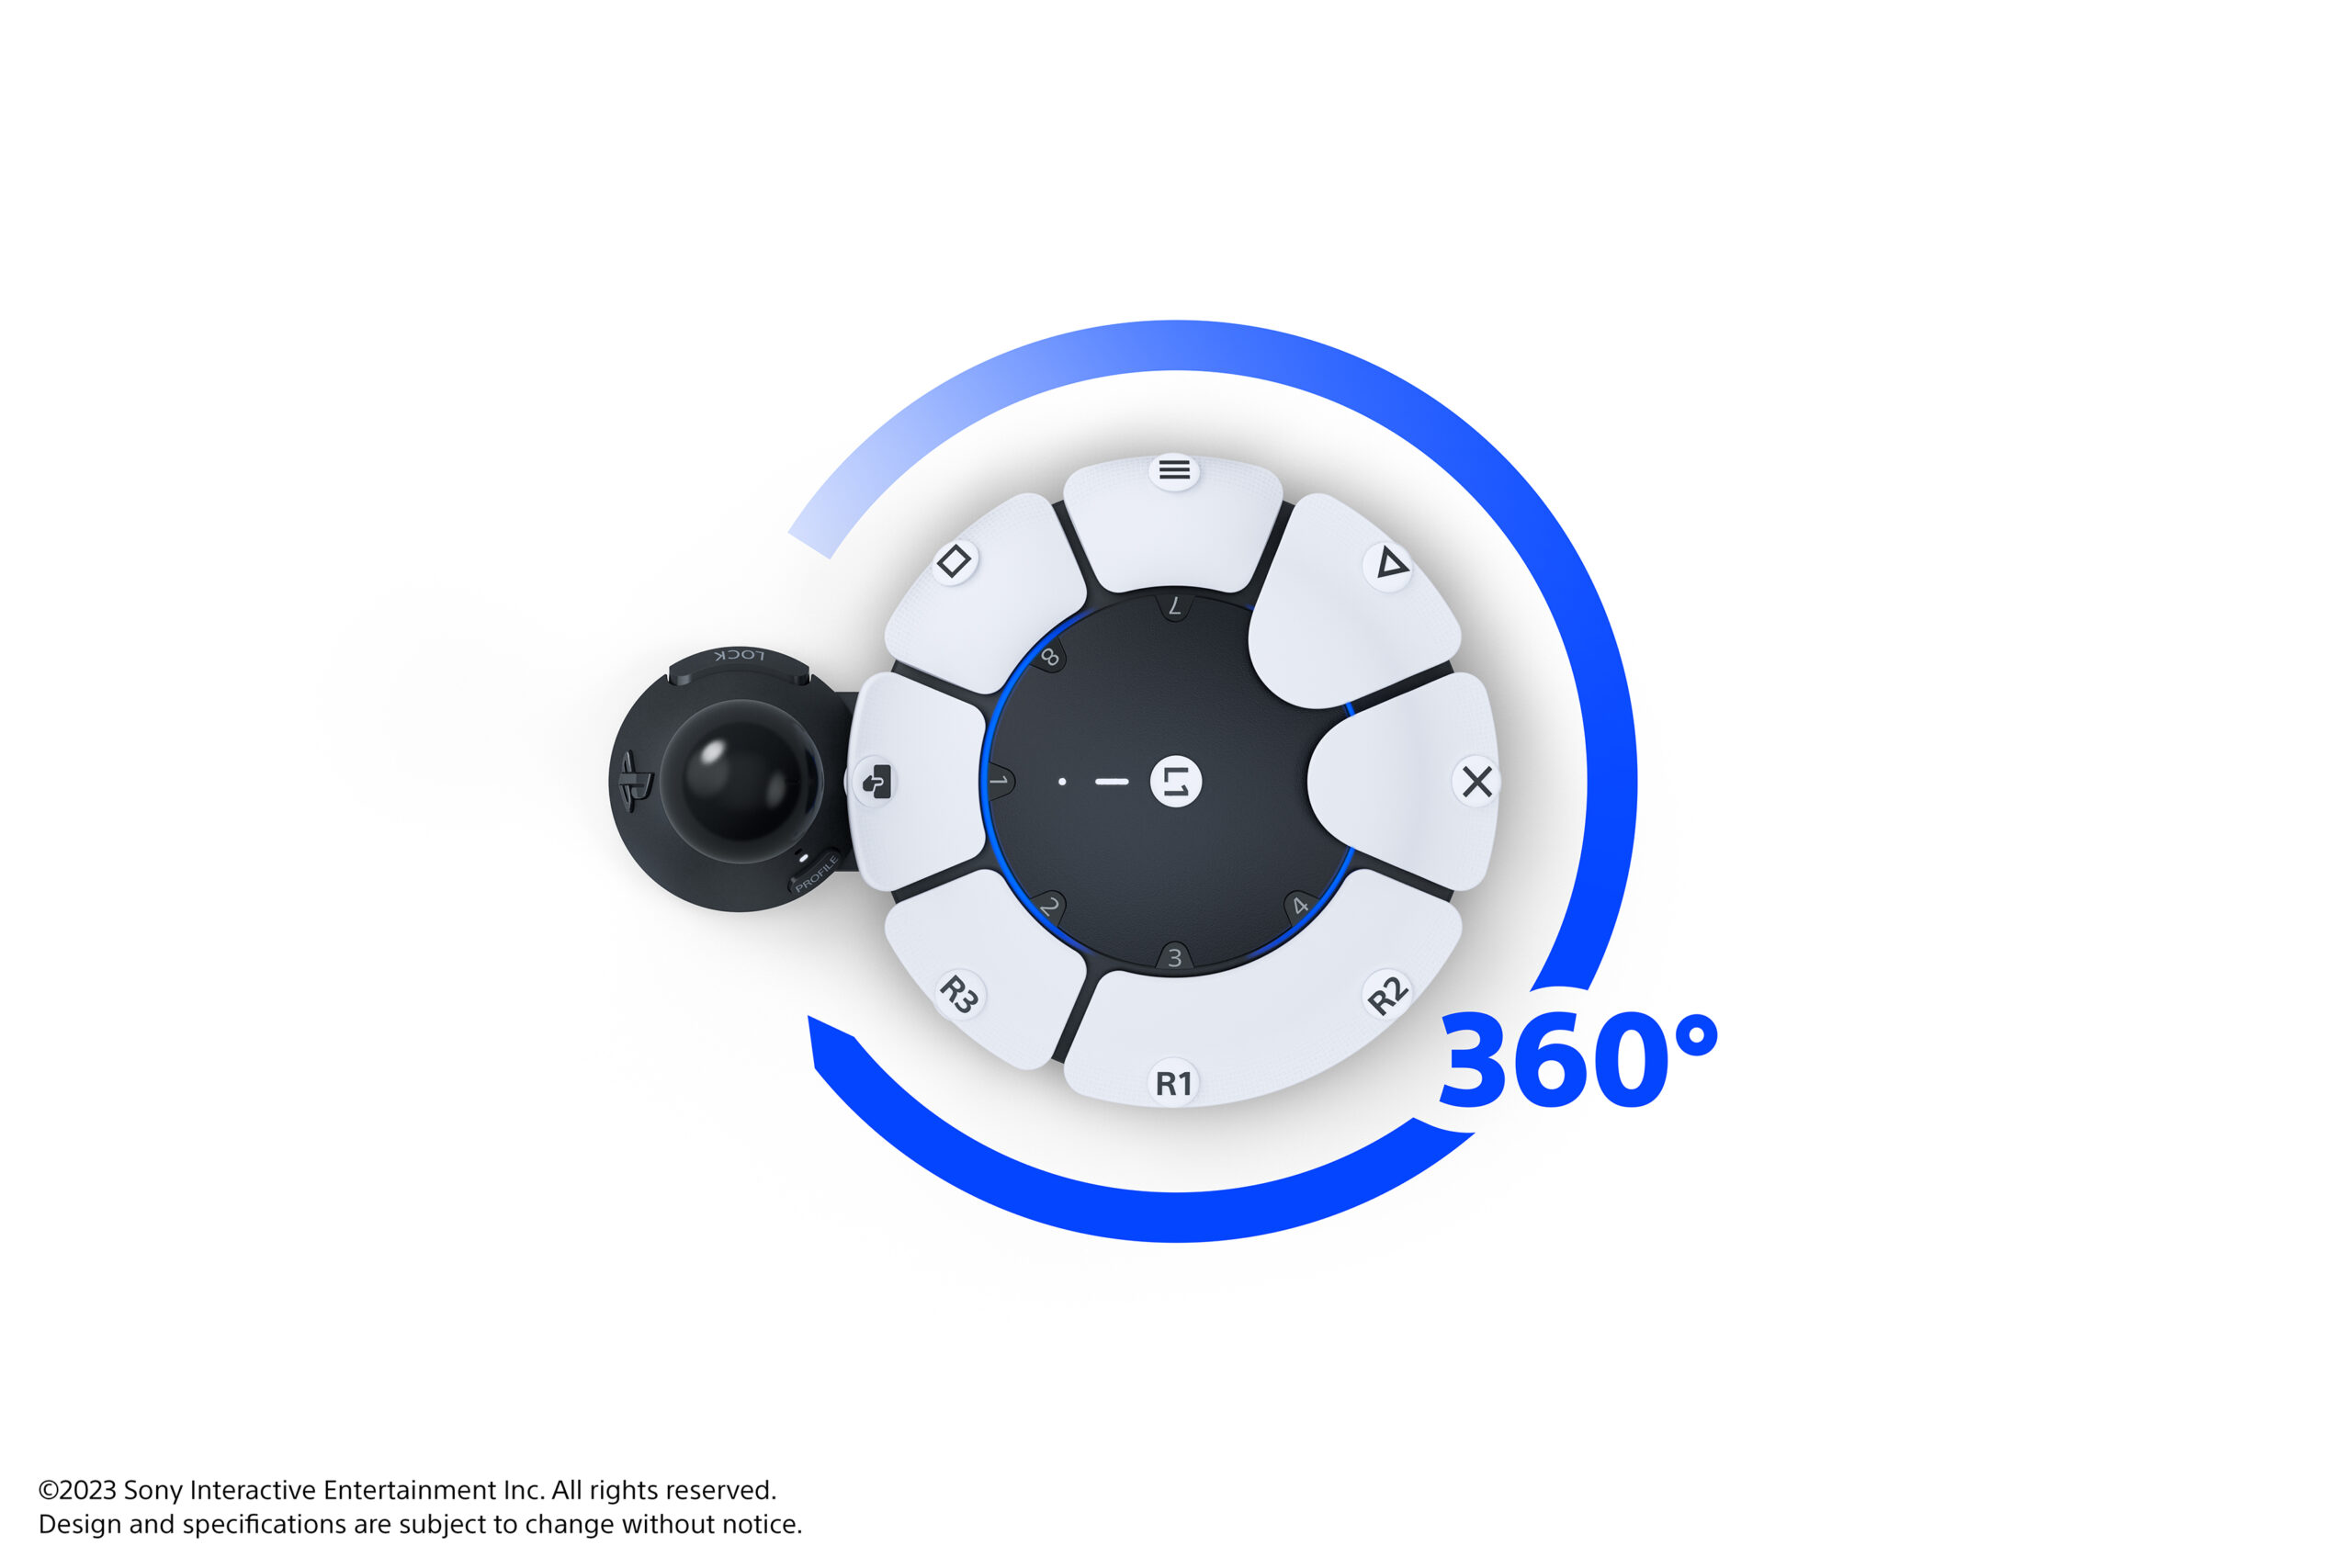  "Image showing 360 degree orientation options for the Access controller"